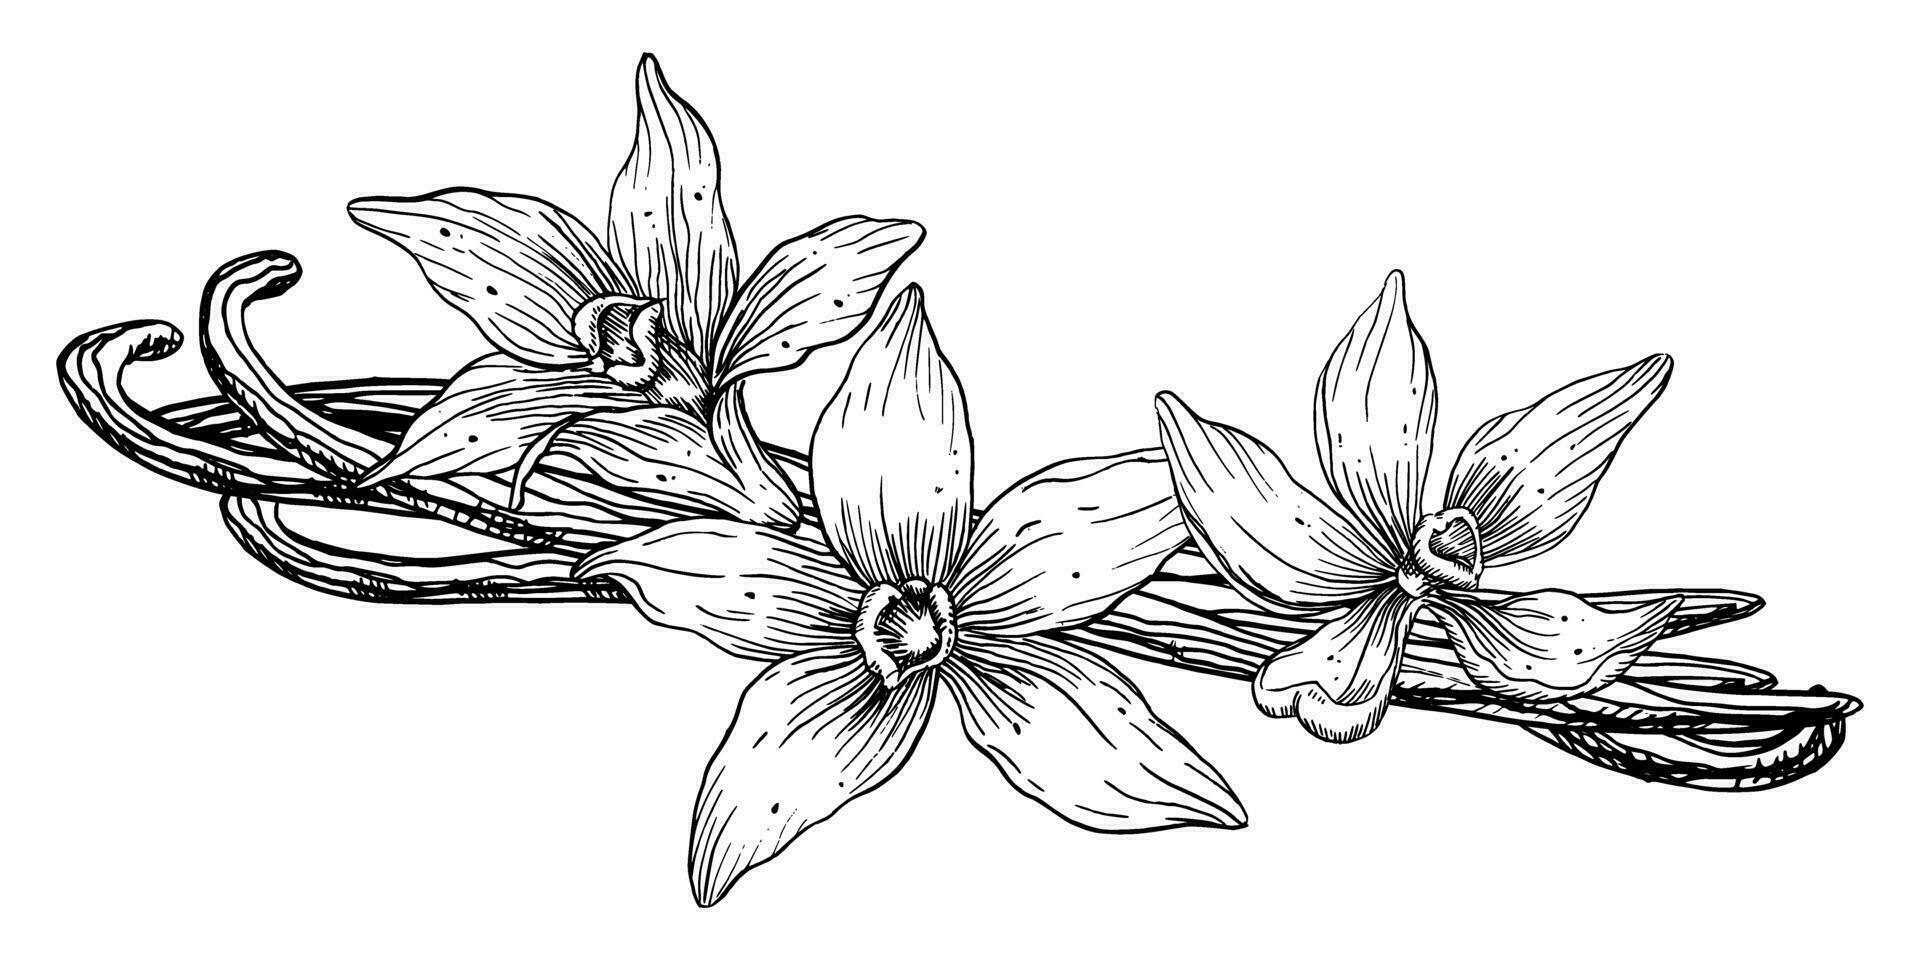 Vanilla Flower with Sticks. Vector hand drawn illustration of orchid Flower and pods on white isolated background. Outline drawing of spice for cooking or aroma oils. Black sketch in line art style.